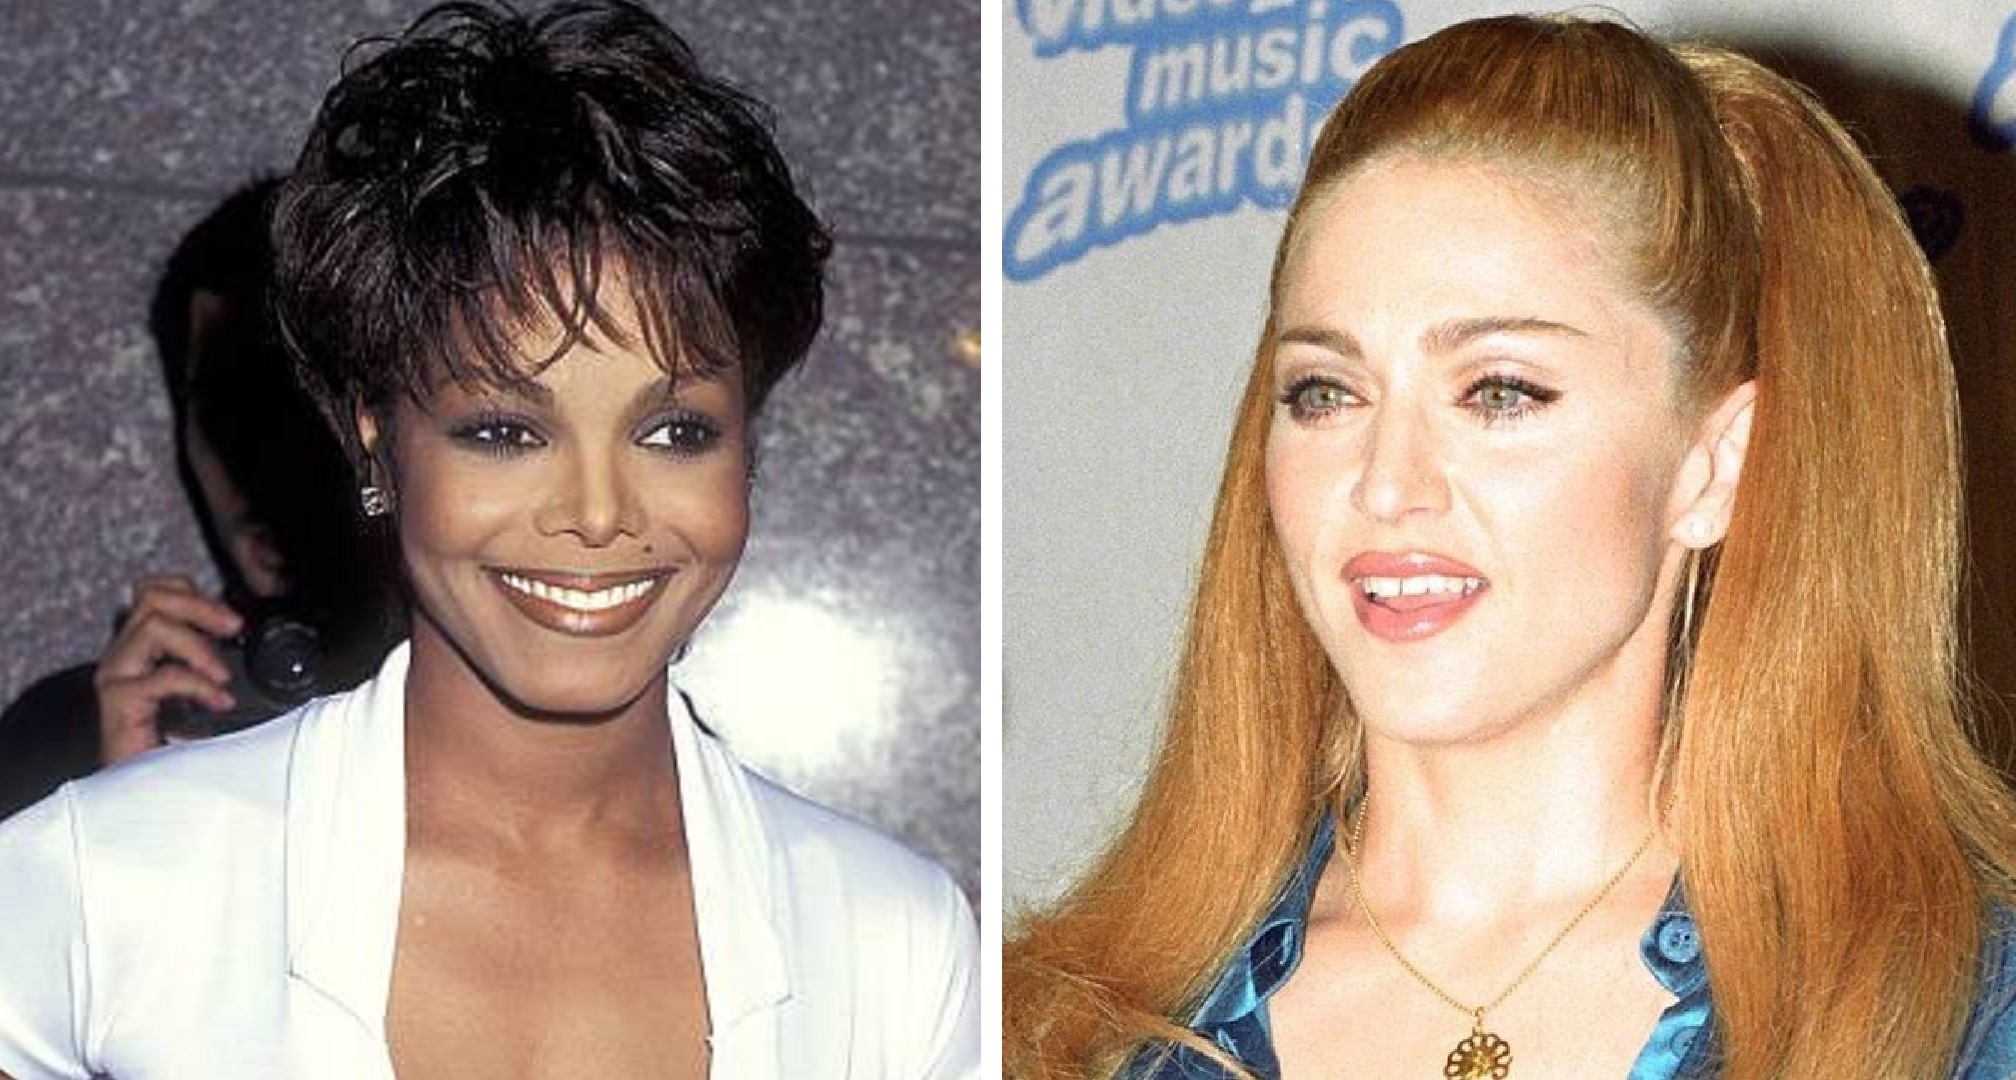 Madonna VS Janet Jackson: Who Had More Impact In The 90’s Music Scene?  Vote Here!